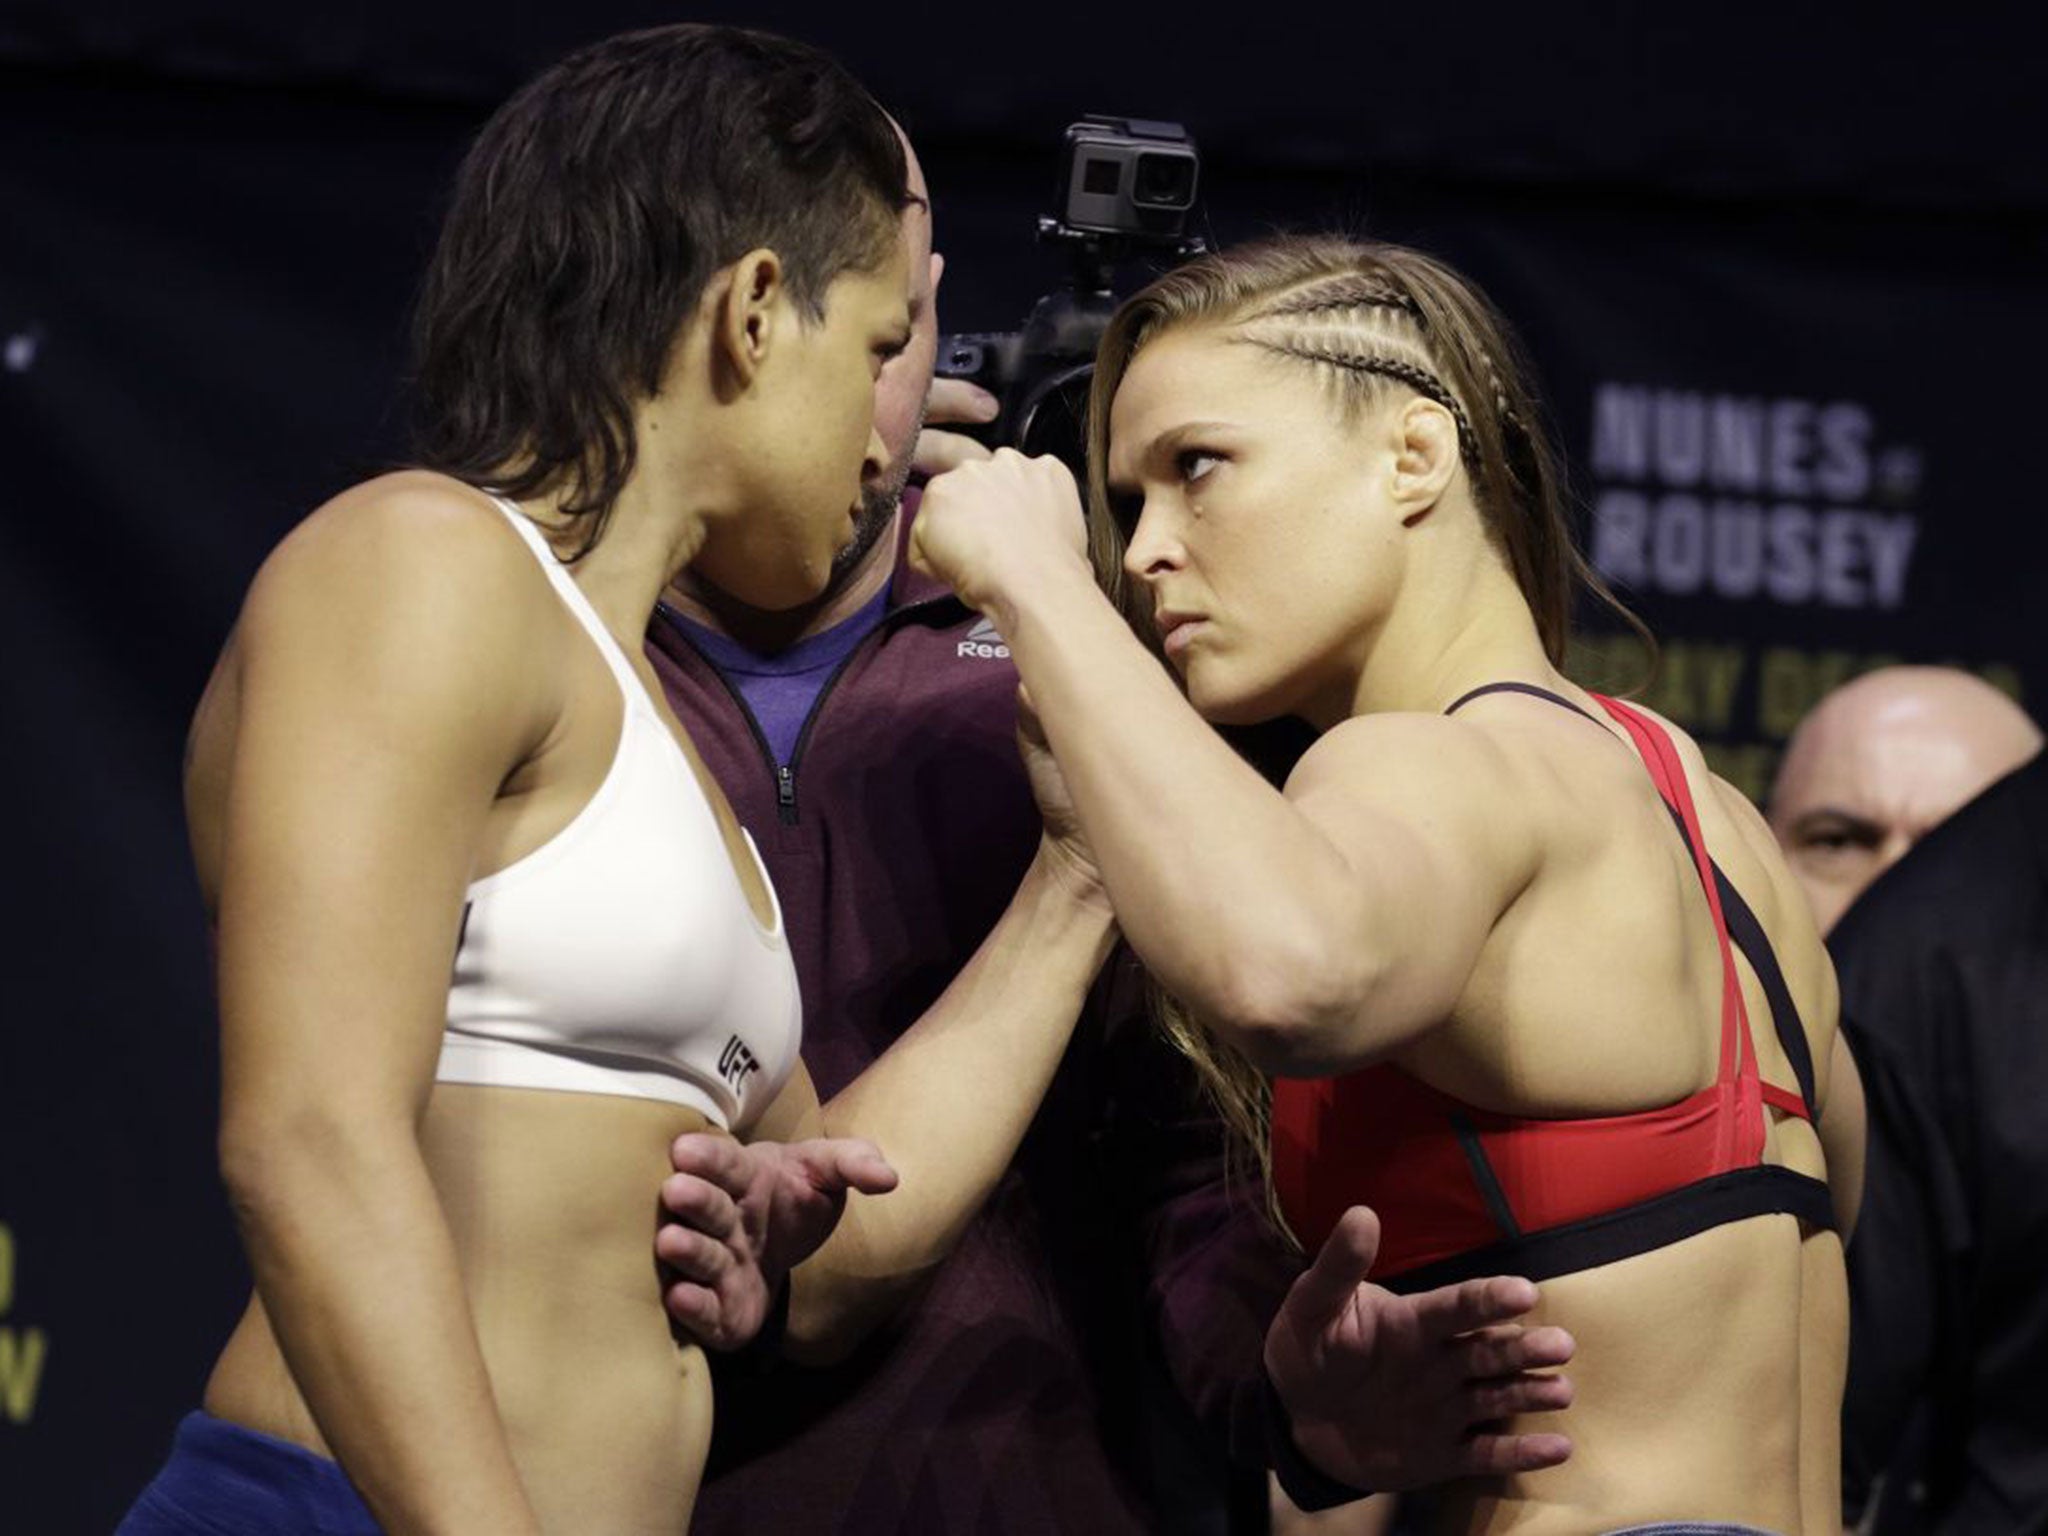 Nunes defends her bantamweight championship against Rousey at UFC 207